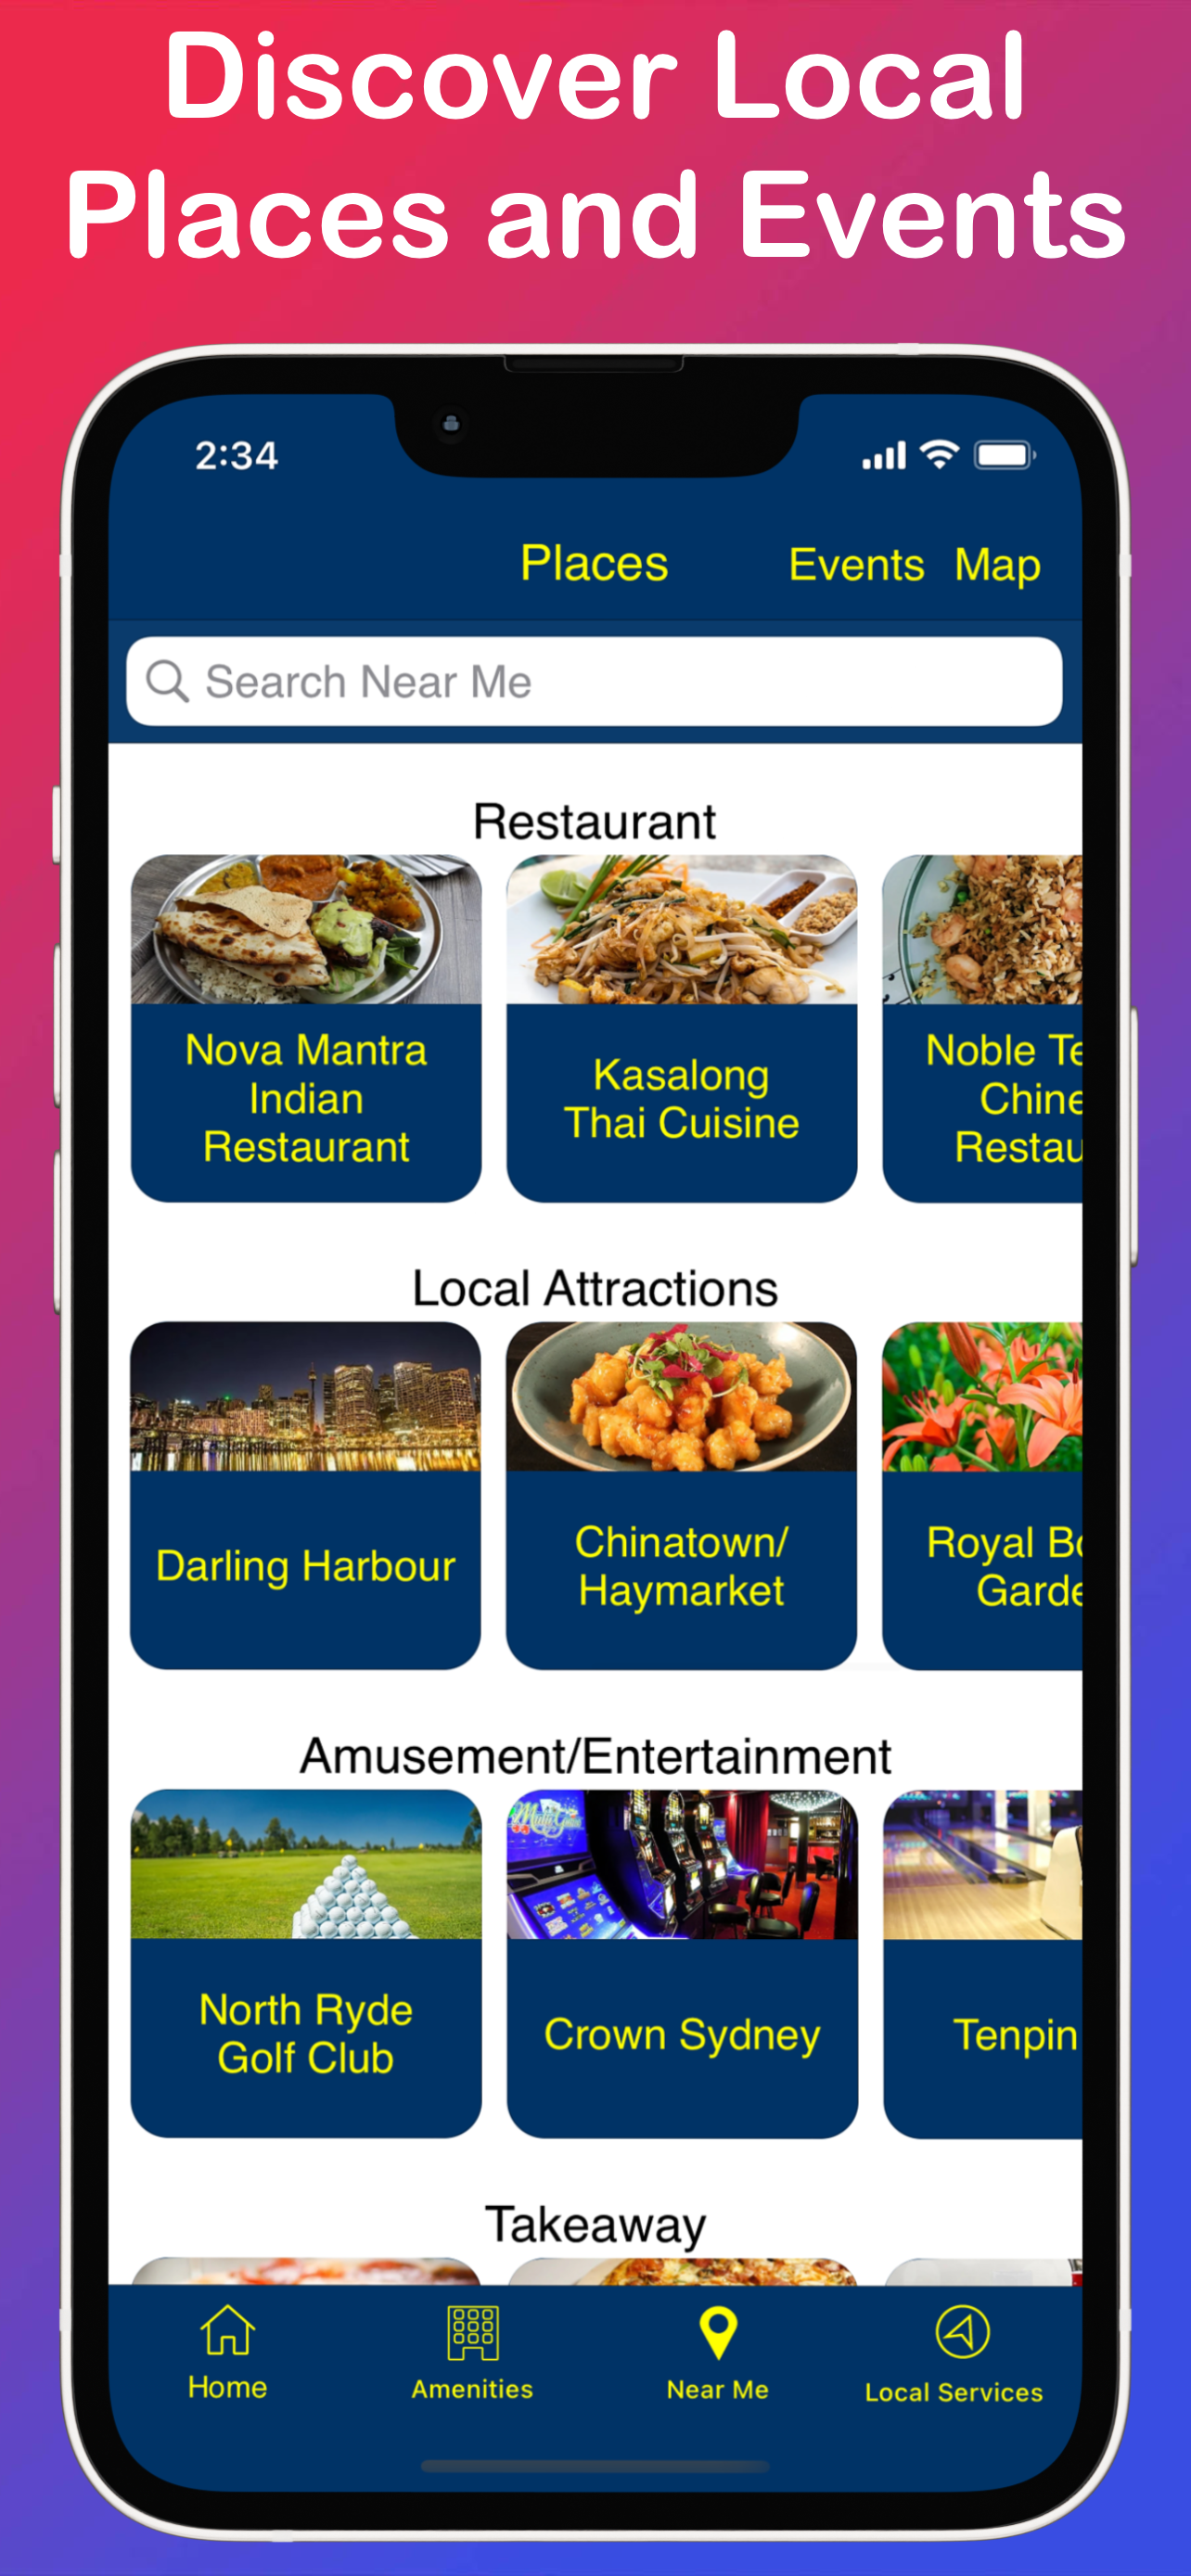 Hinfo Guest Digital Compendium - Mobile App on iPhone 13 Pro Max - Discover Local Places and Events